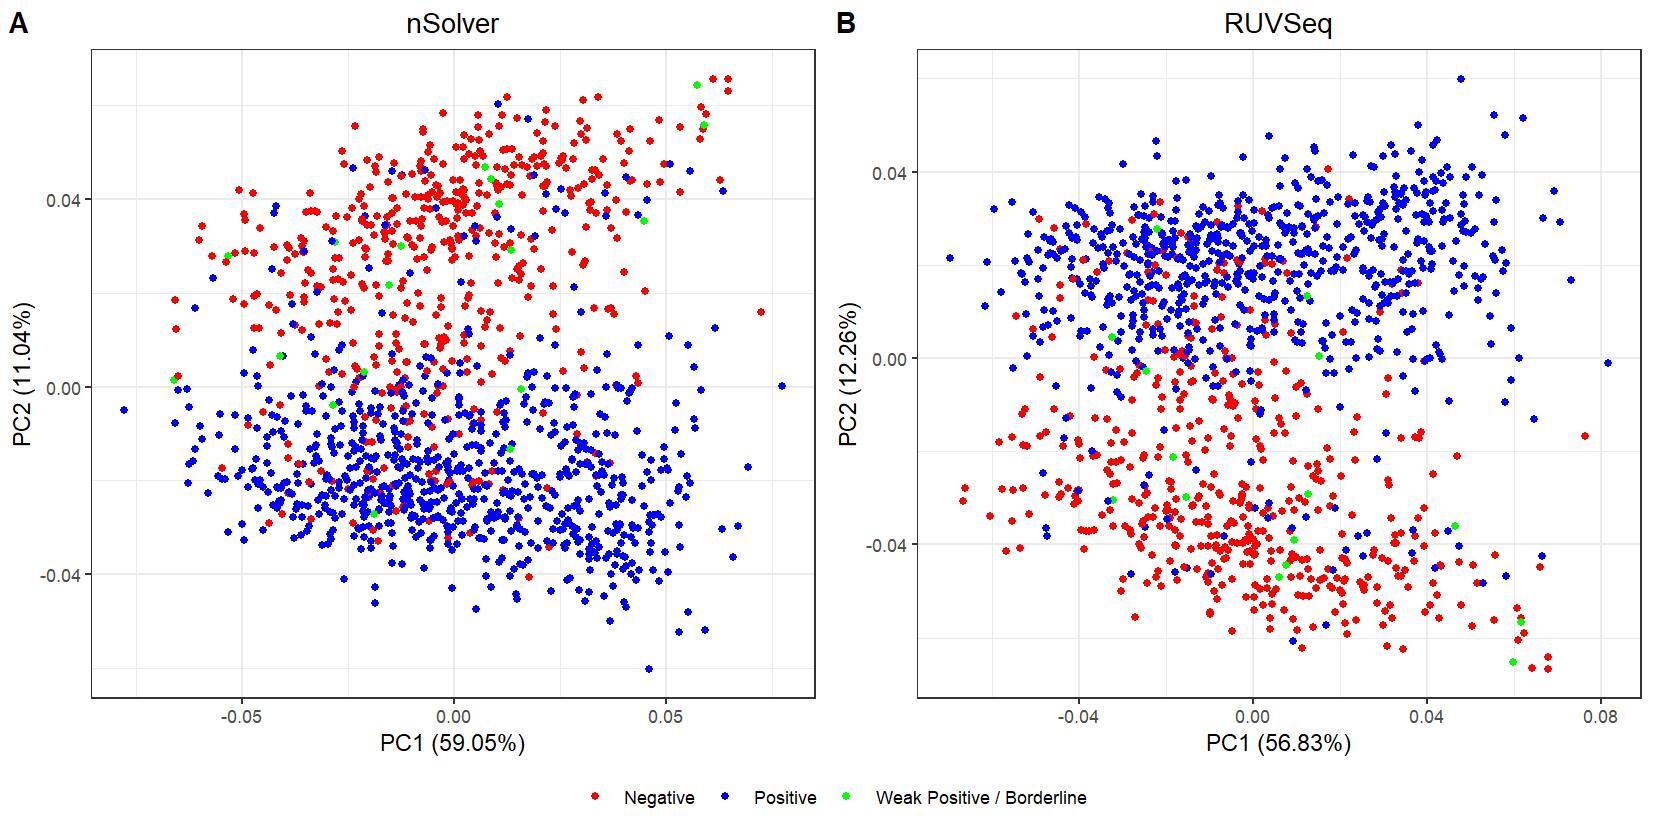 PCA of nSolver and RUVSeq normalized data, colored for Estrogen receptor status.